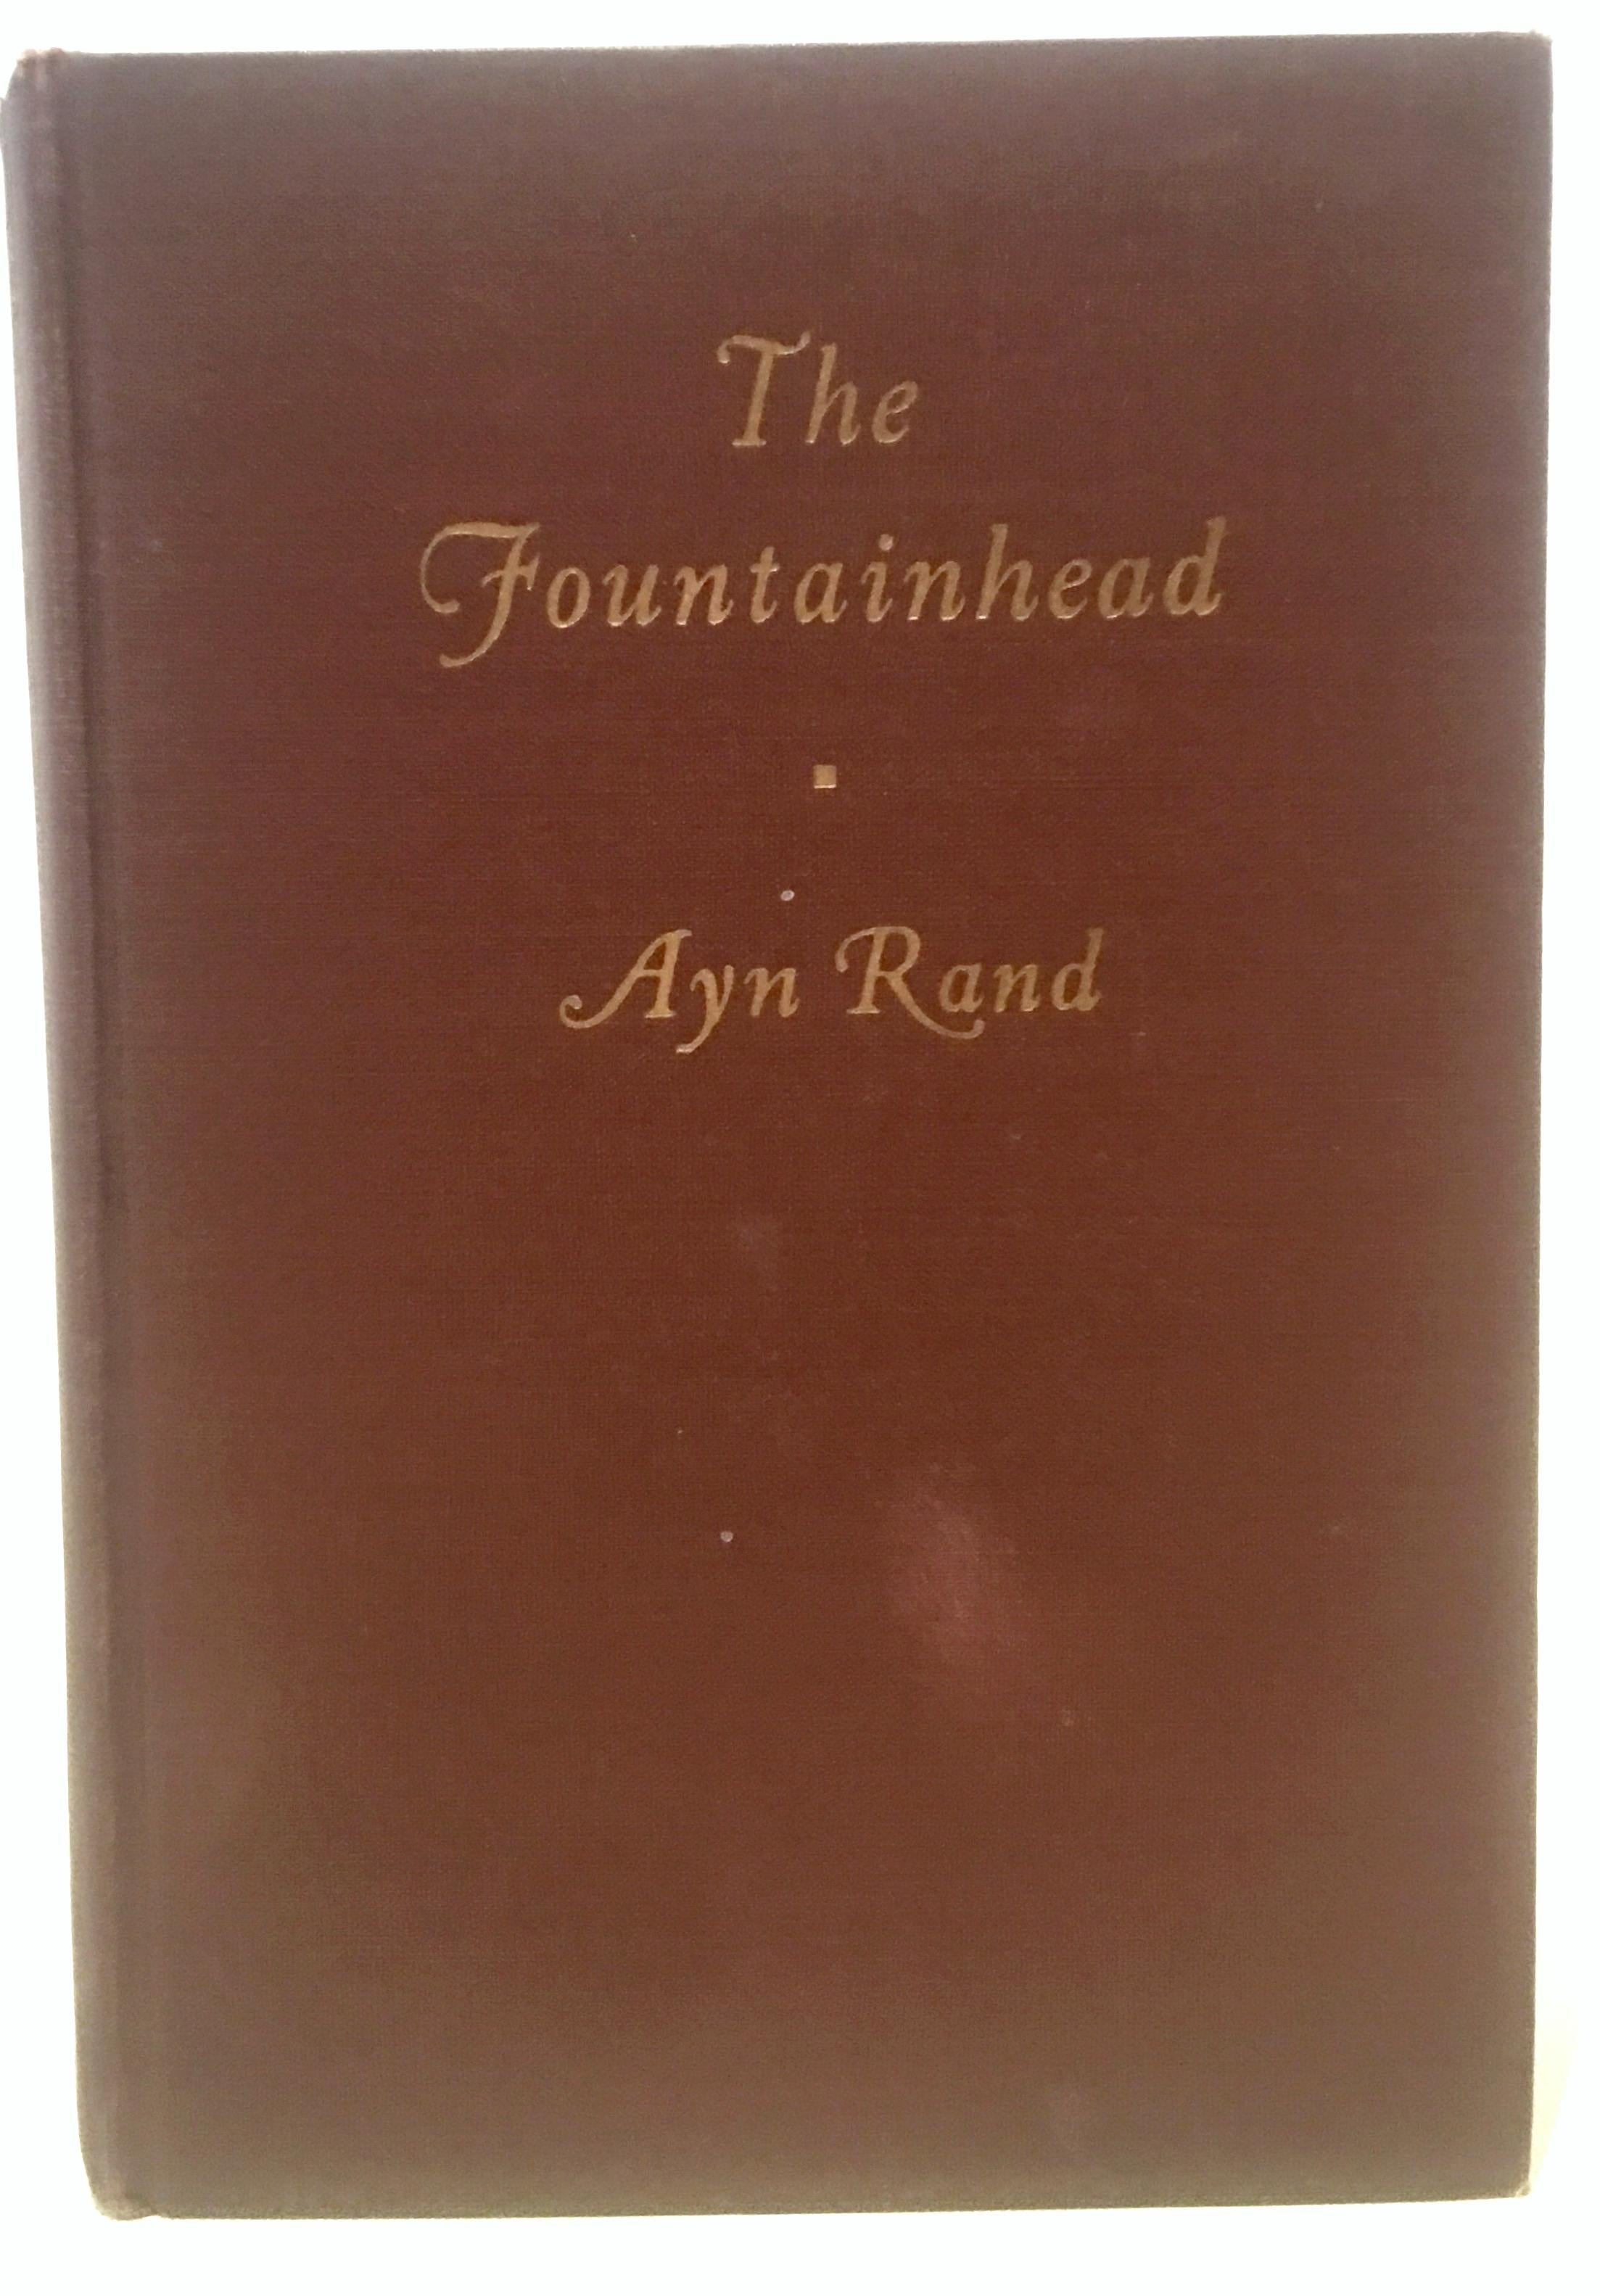 1943 ‘The Fountainhead Book by, Ayn Rand’, Blakiston Company Bobbs-MerrillI .
First Edition/Early Printing Early Edition of Rand’s classic “The Fountainhead”. This book has all first edition points- It is not marked First Edition - it could be 1st